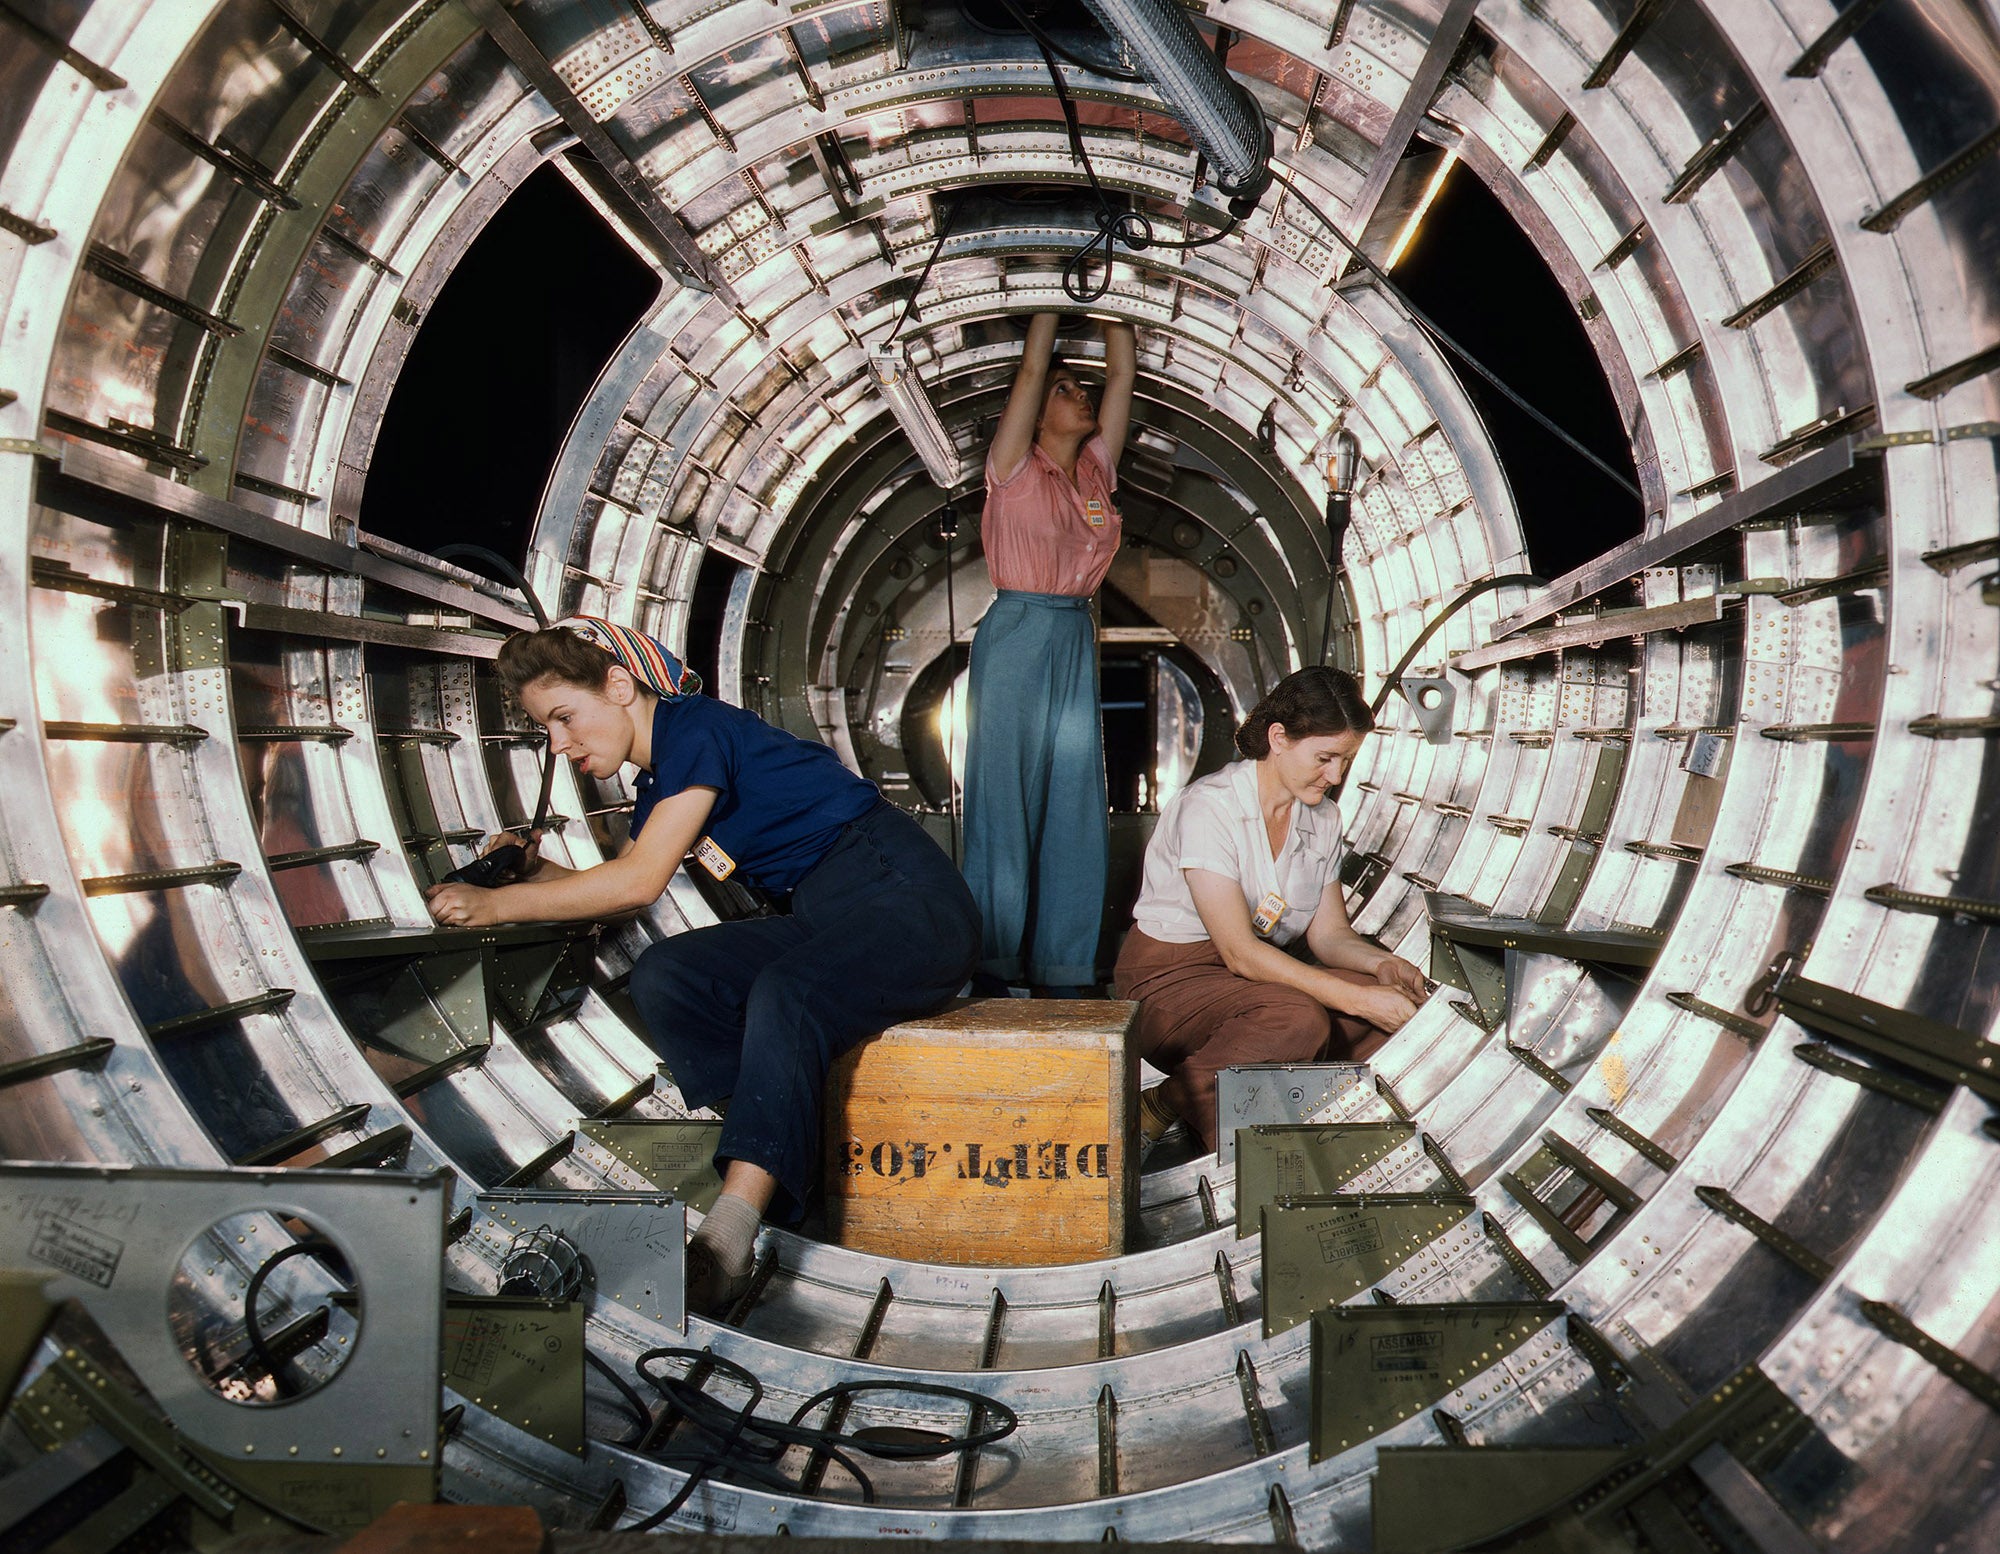 Women workers install fixtures and assemblies to a tail fuselage section of a B-17 bomber at the Douglas Aircraft Company plant, Long Beach, California, 1942